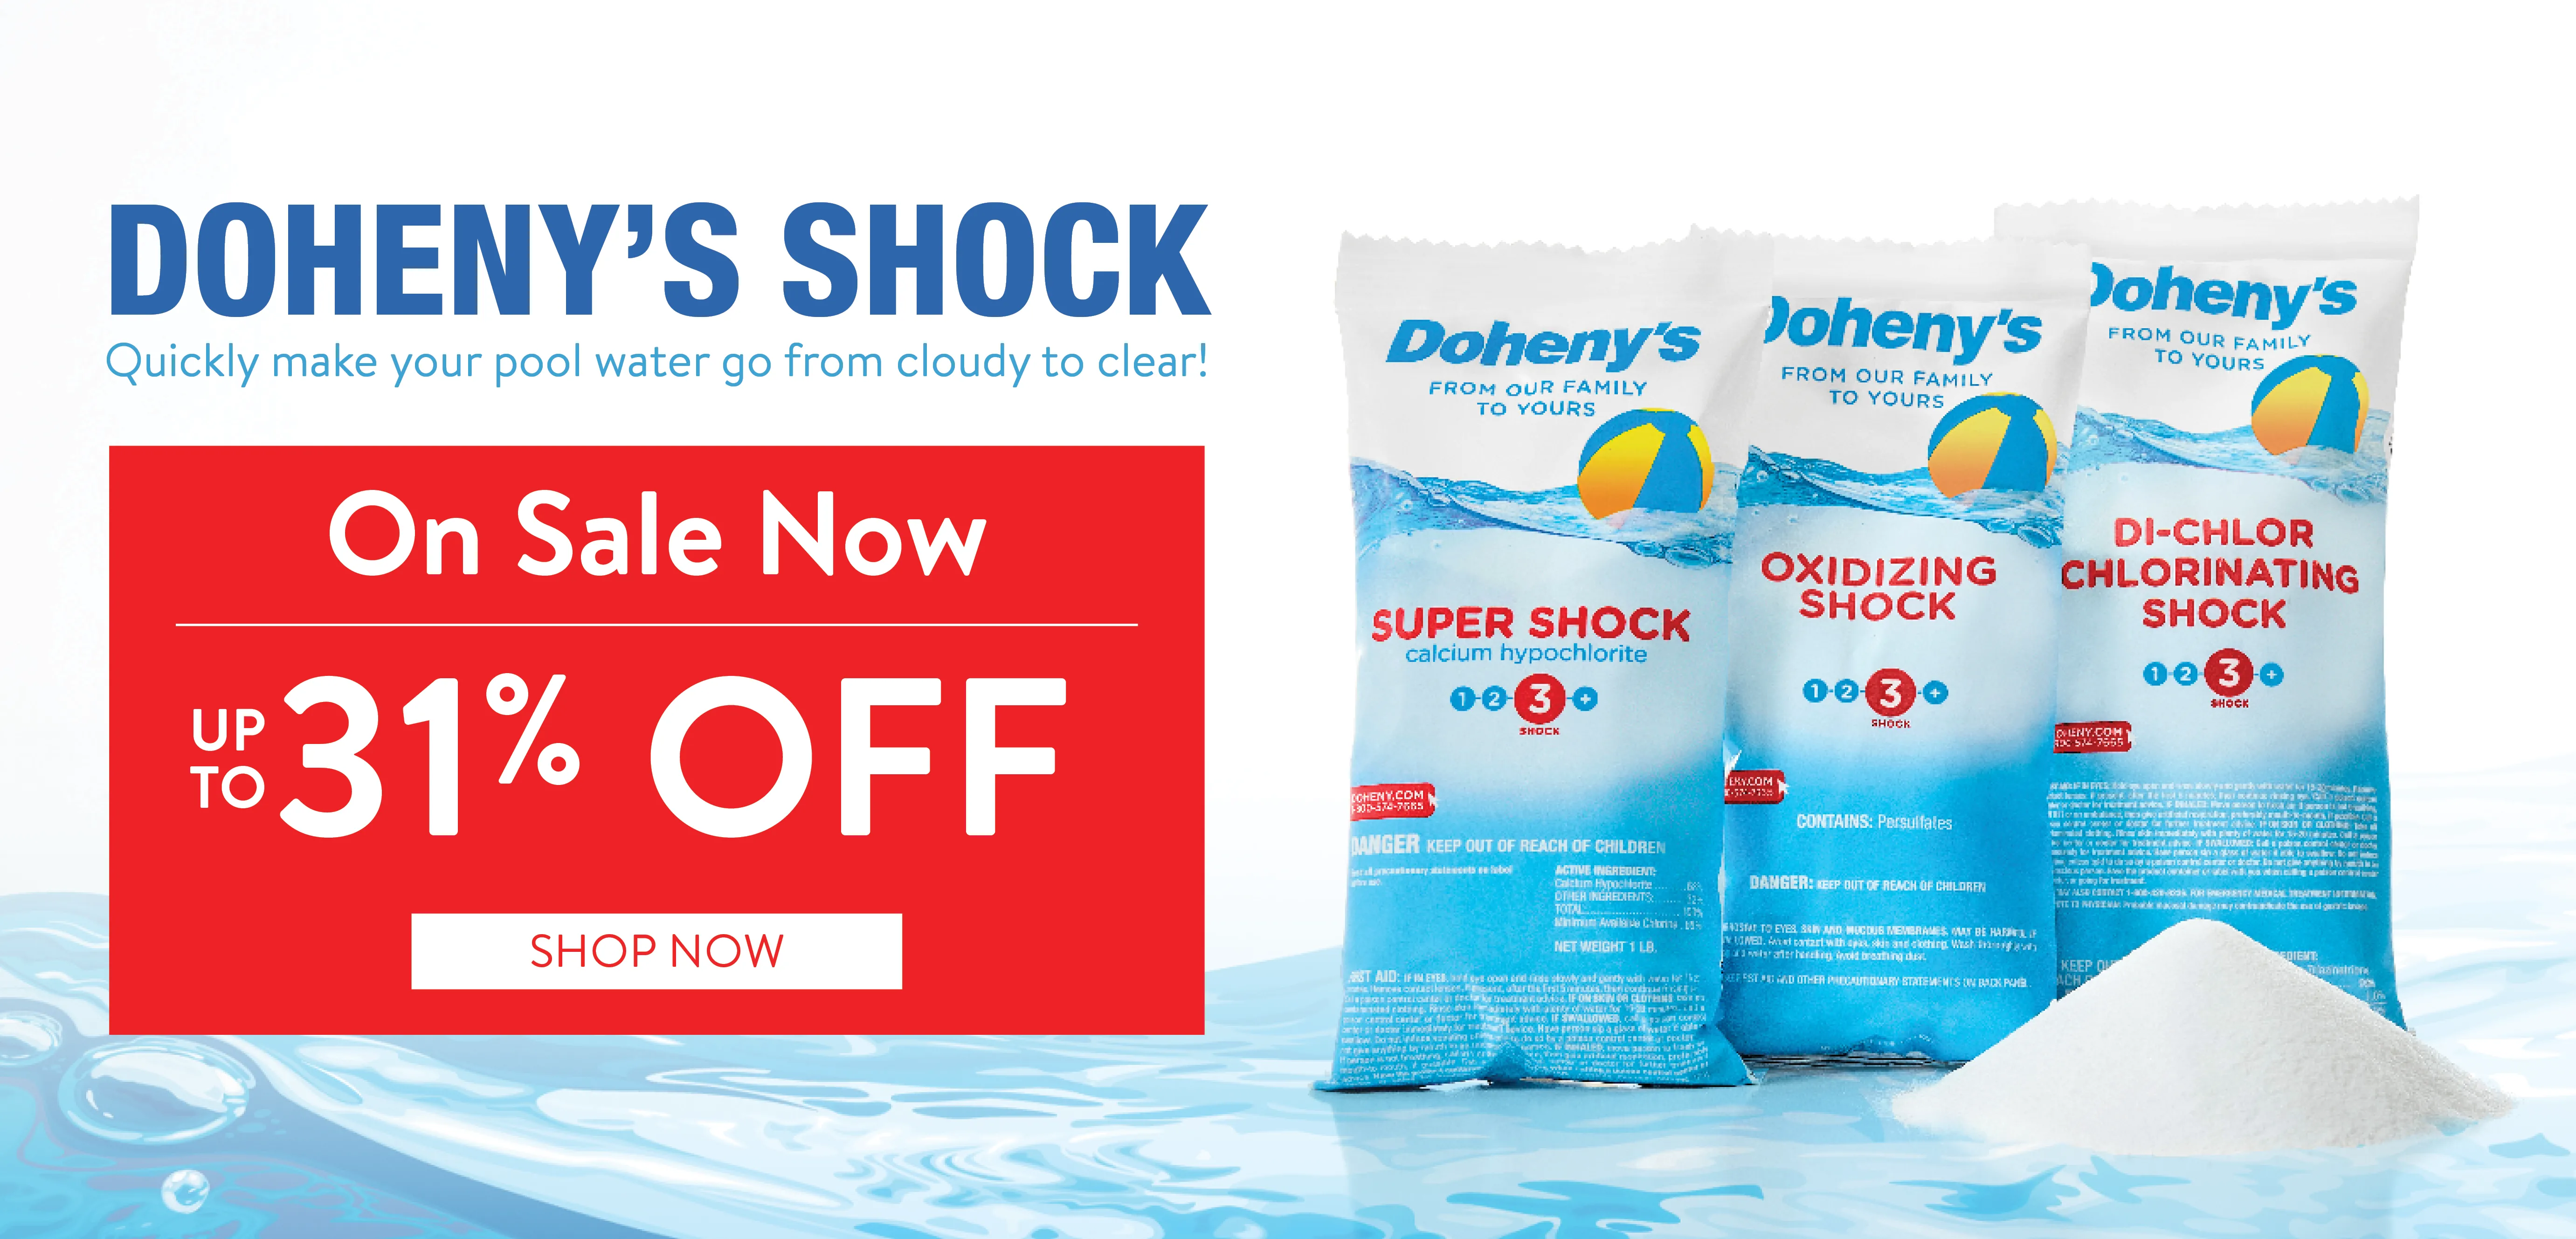 Quickly make your pool water go from cloudy to clear with Doheny's Shock. Up to 31% OFF, shop now.